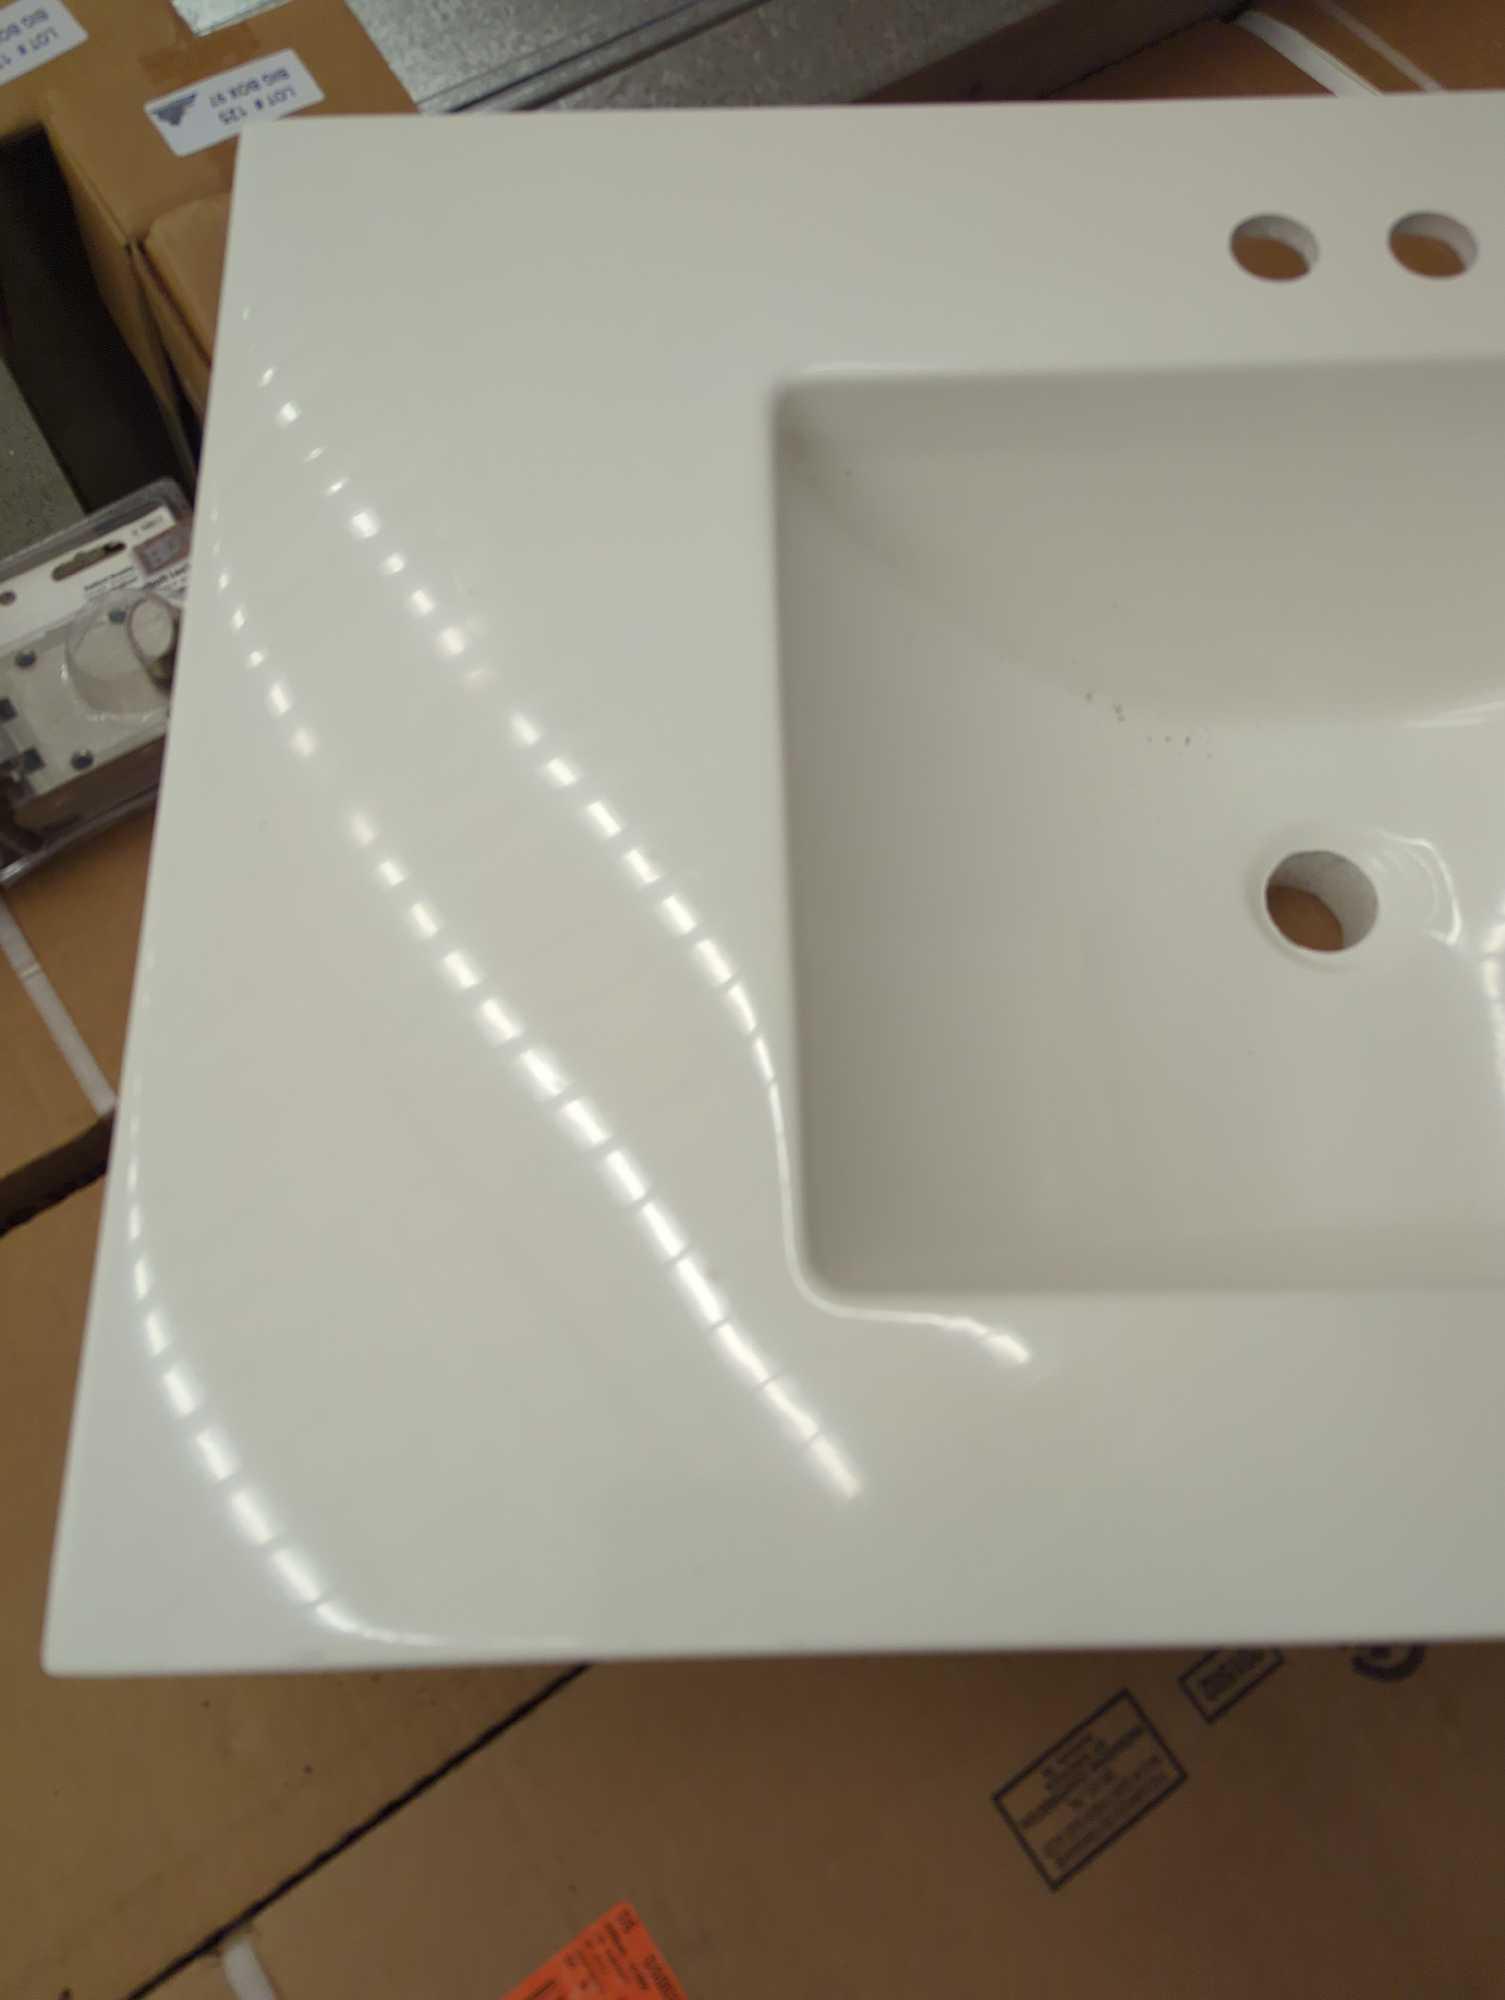 Style Selection 30.5 in x 19 in White Culture Sink, With Three Holes, Pre Drilled 6 Inch Widespread